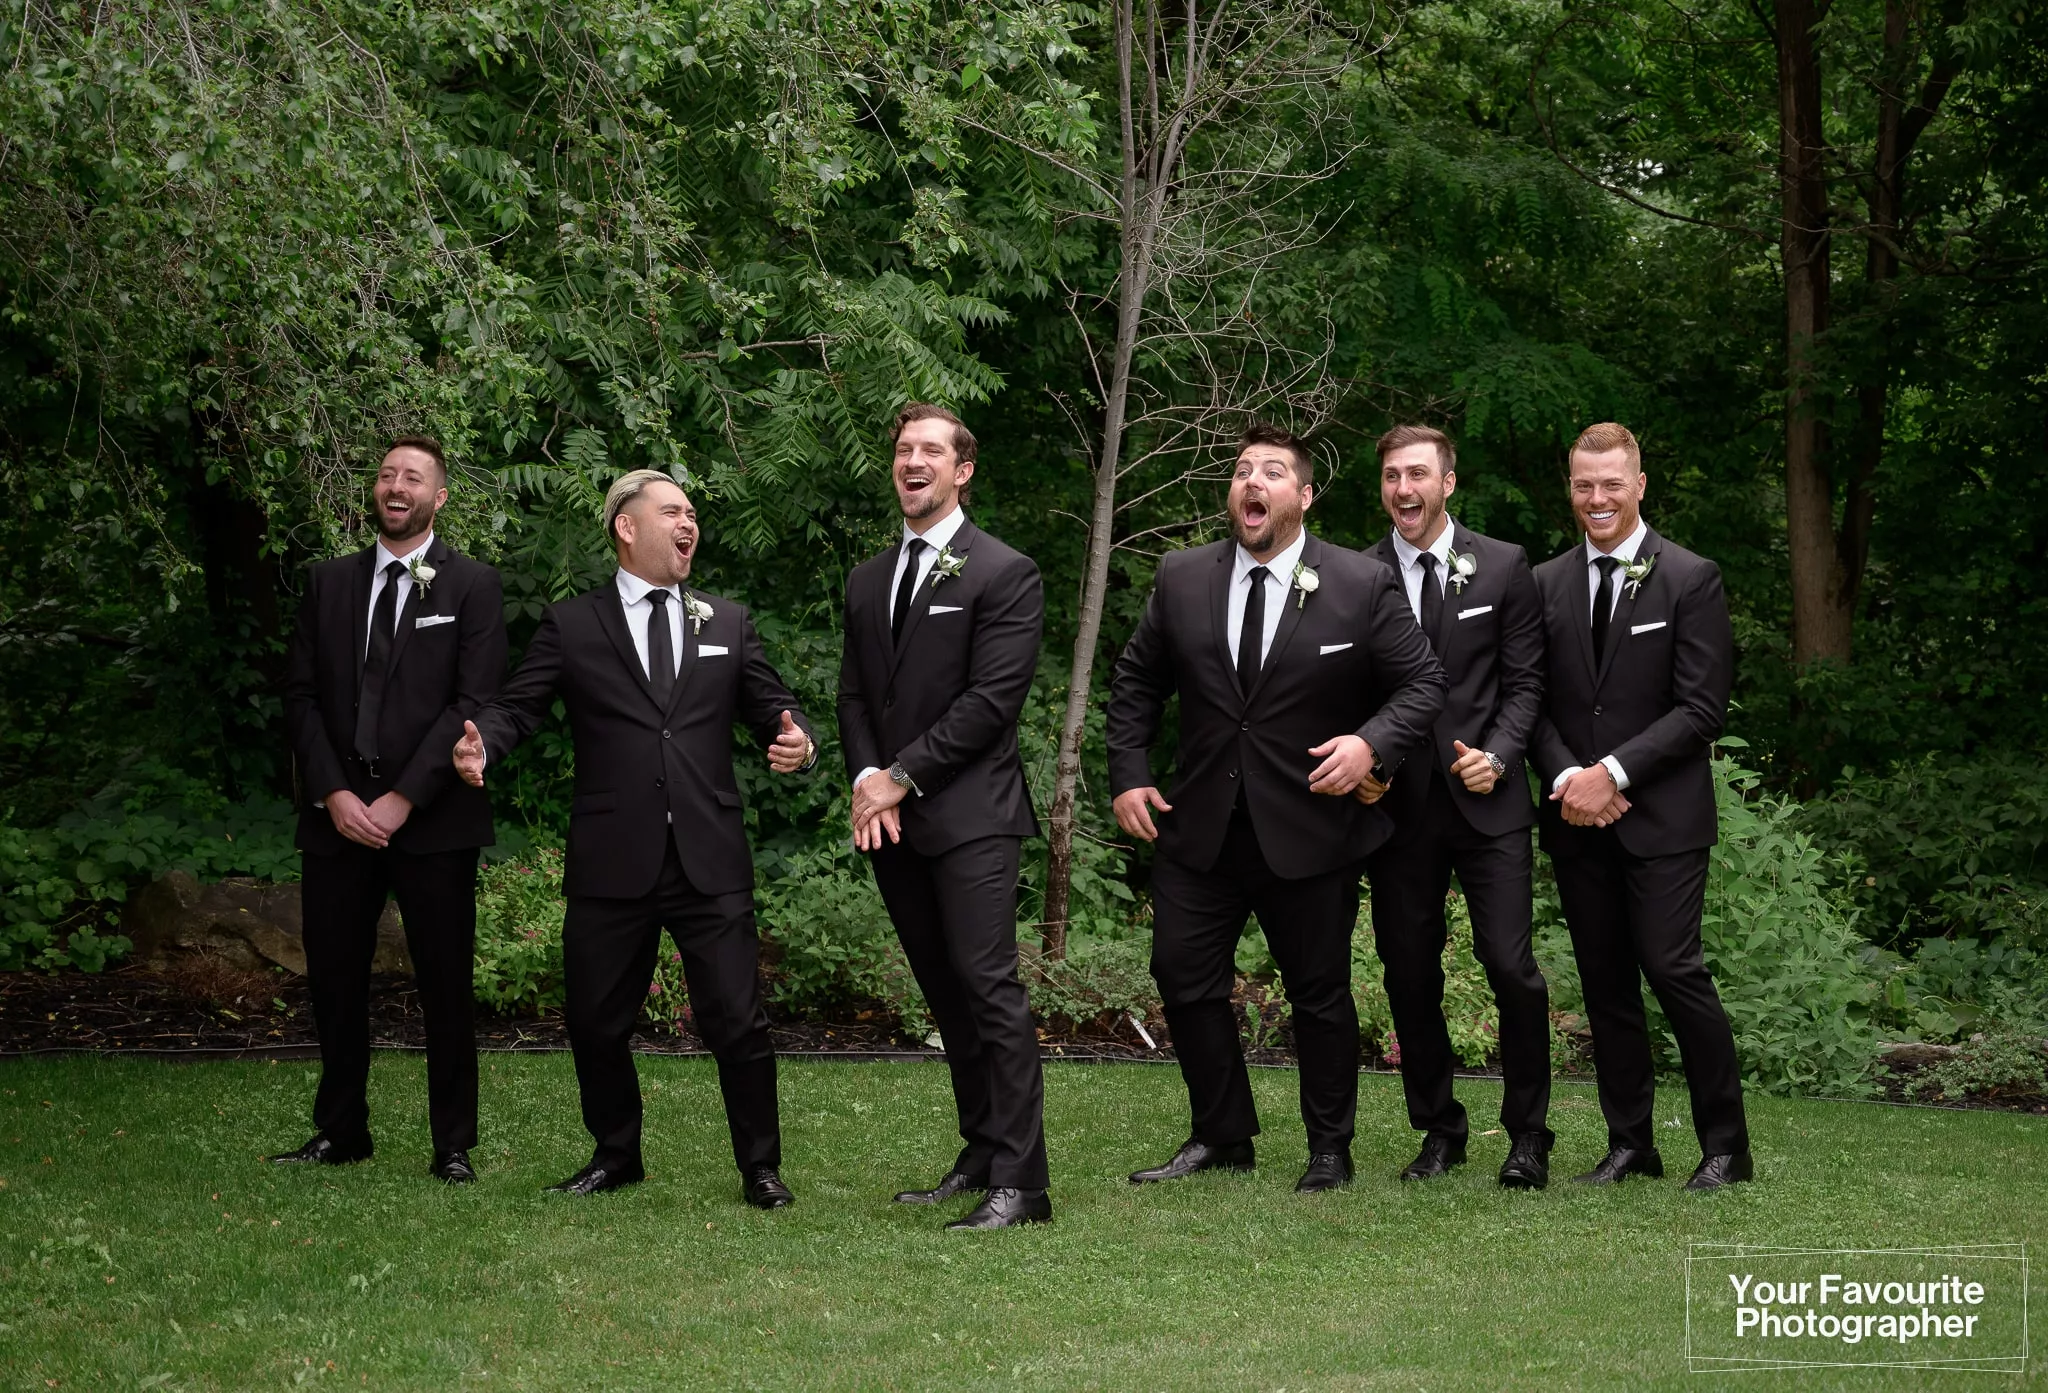 Groomsmen reacting to the bride "icing" them at The Doctor's House wedding venue